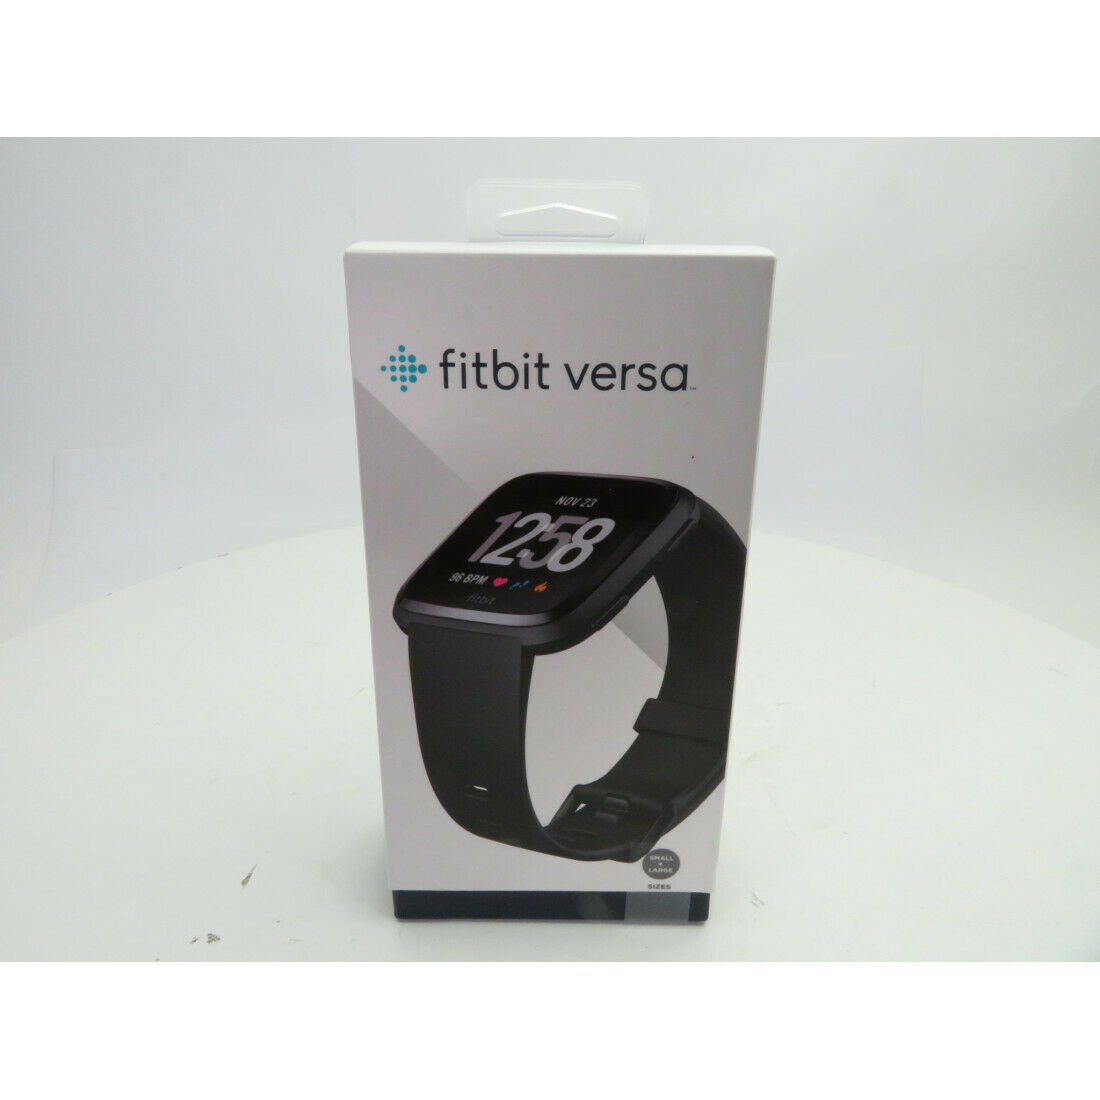 Fitbit Versa Smart Watch for iOS & Android, One Size (S & L Bands Included) - image 1 of 4